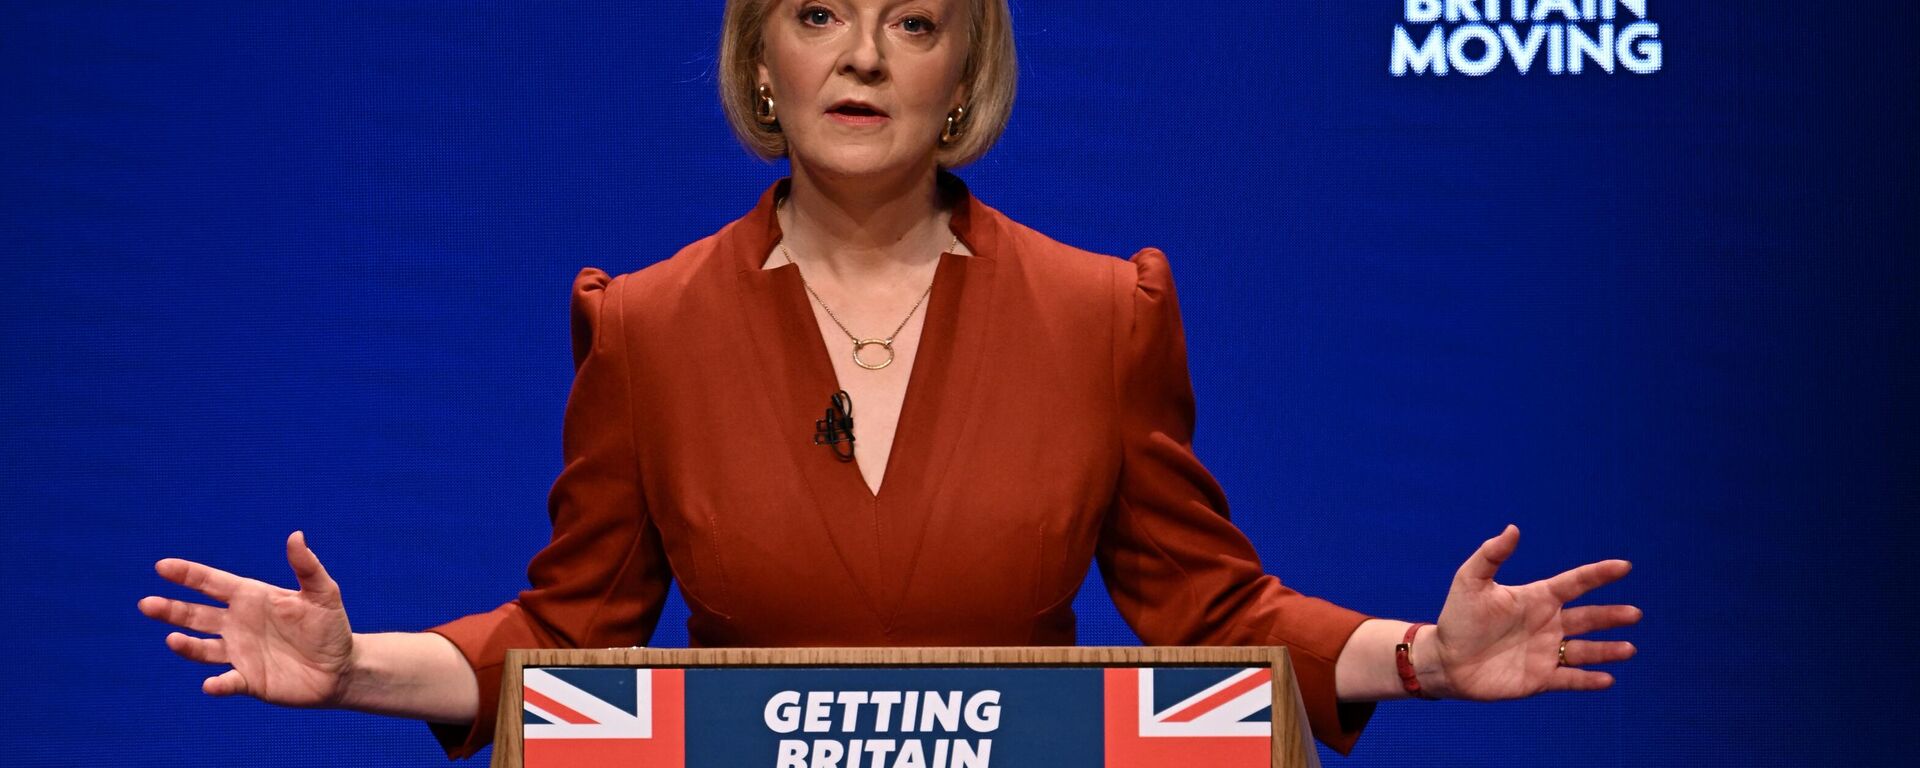 Britain's Prime Minister Liz Truss delivers her keynote address on the final day of the annual Conservative Party Conference in Birmingham, central England, on October 5, 2022 - Sputnik International, 1920, 17.10.2022